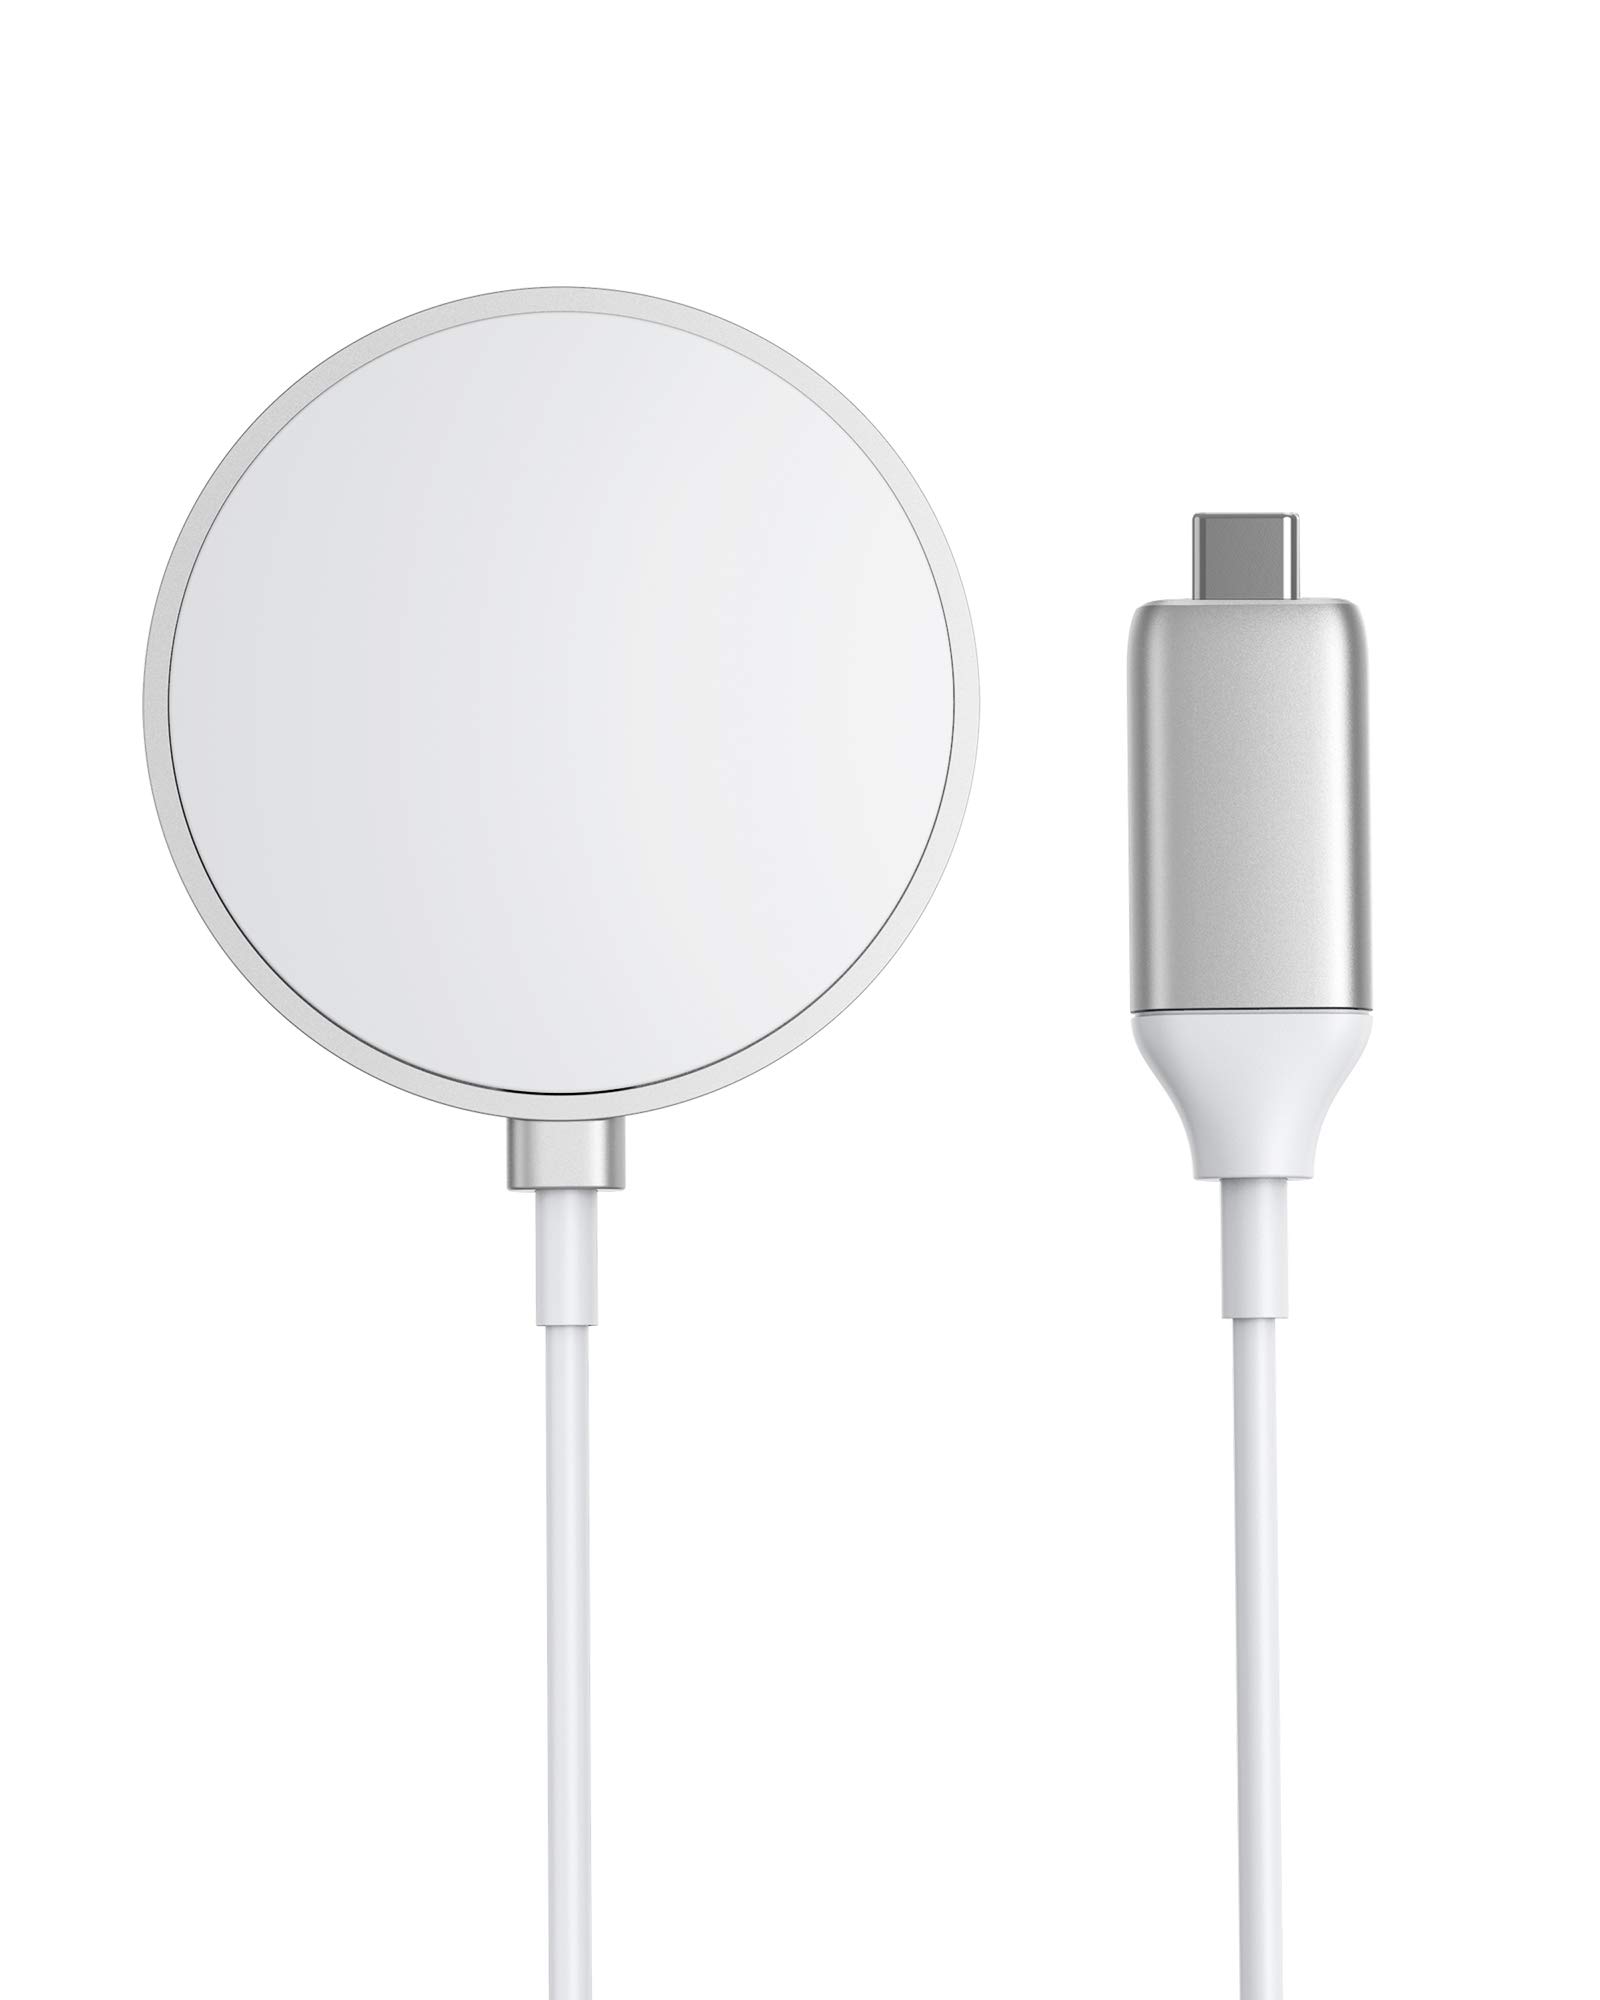 Charging cable and wireless charging pad